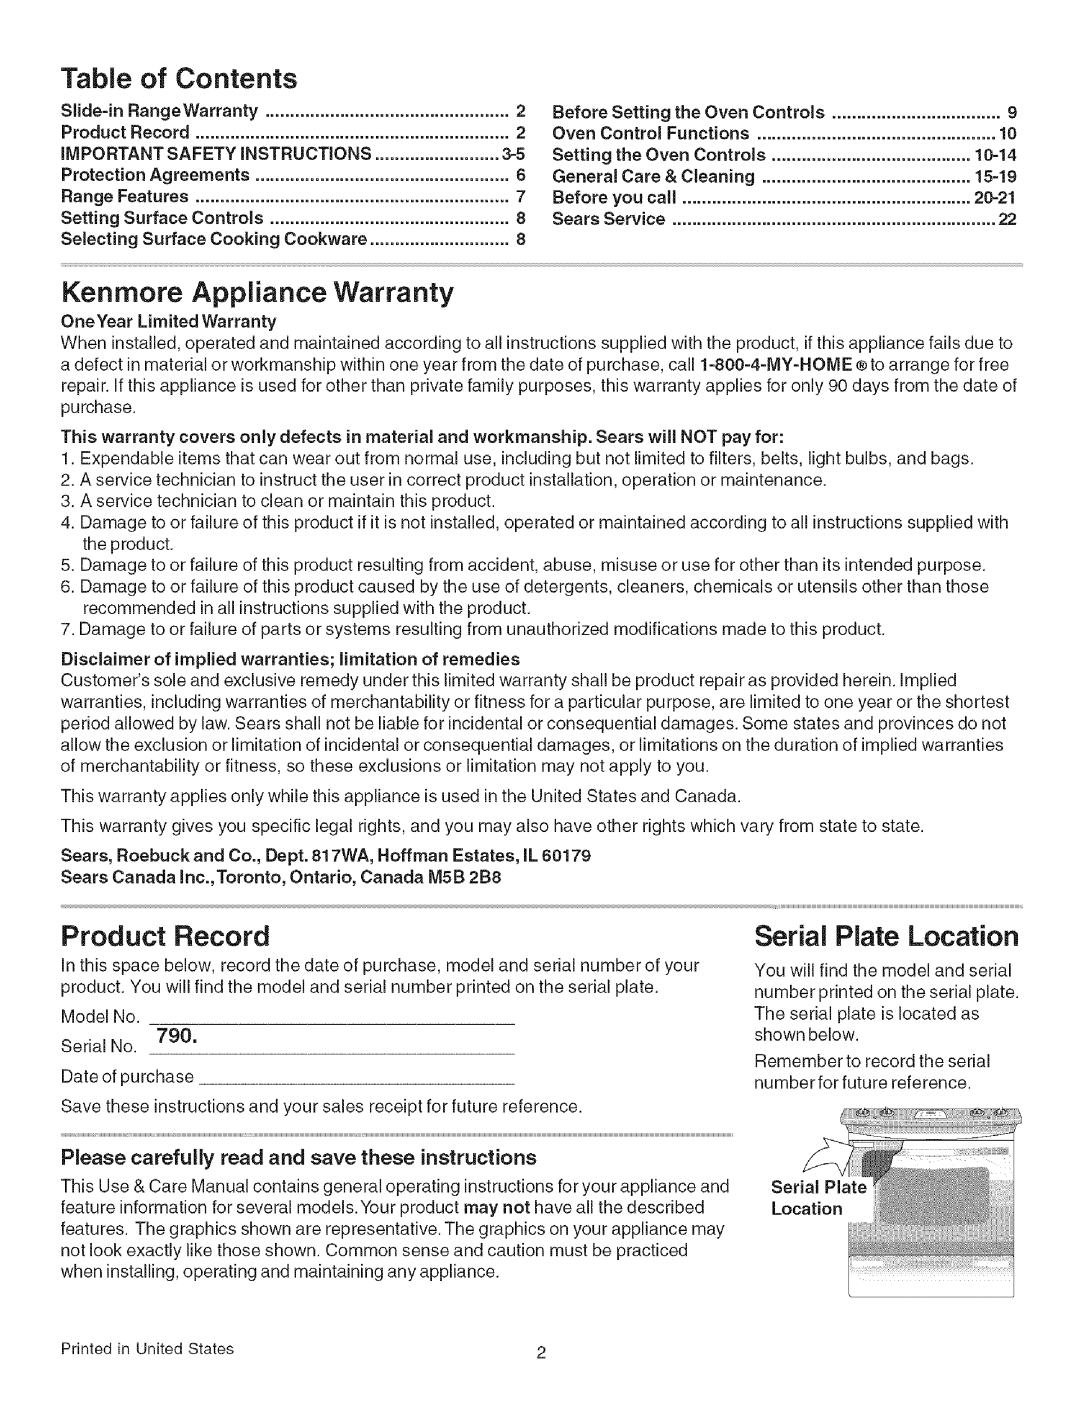 Kenmore 790.4626 manual Table of Contents, Kenrnore Appliance Warranty, Product Record, Serial Plate Location, 10-14, 15-19 